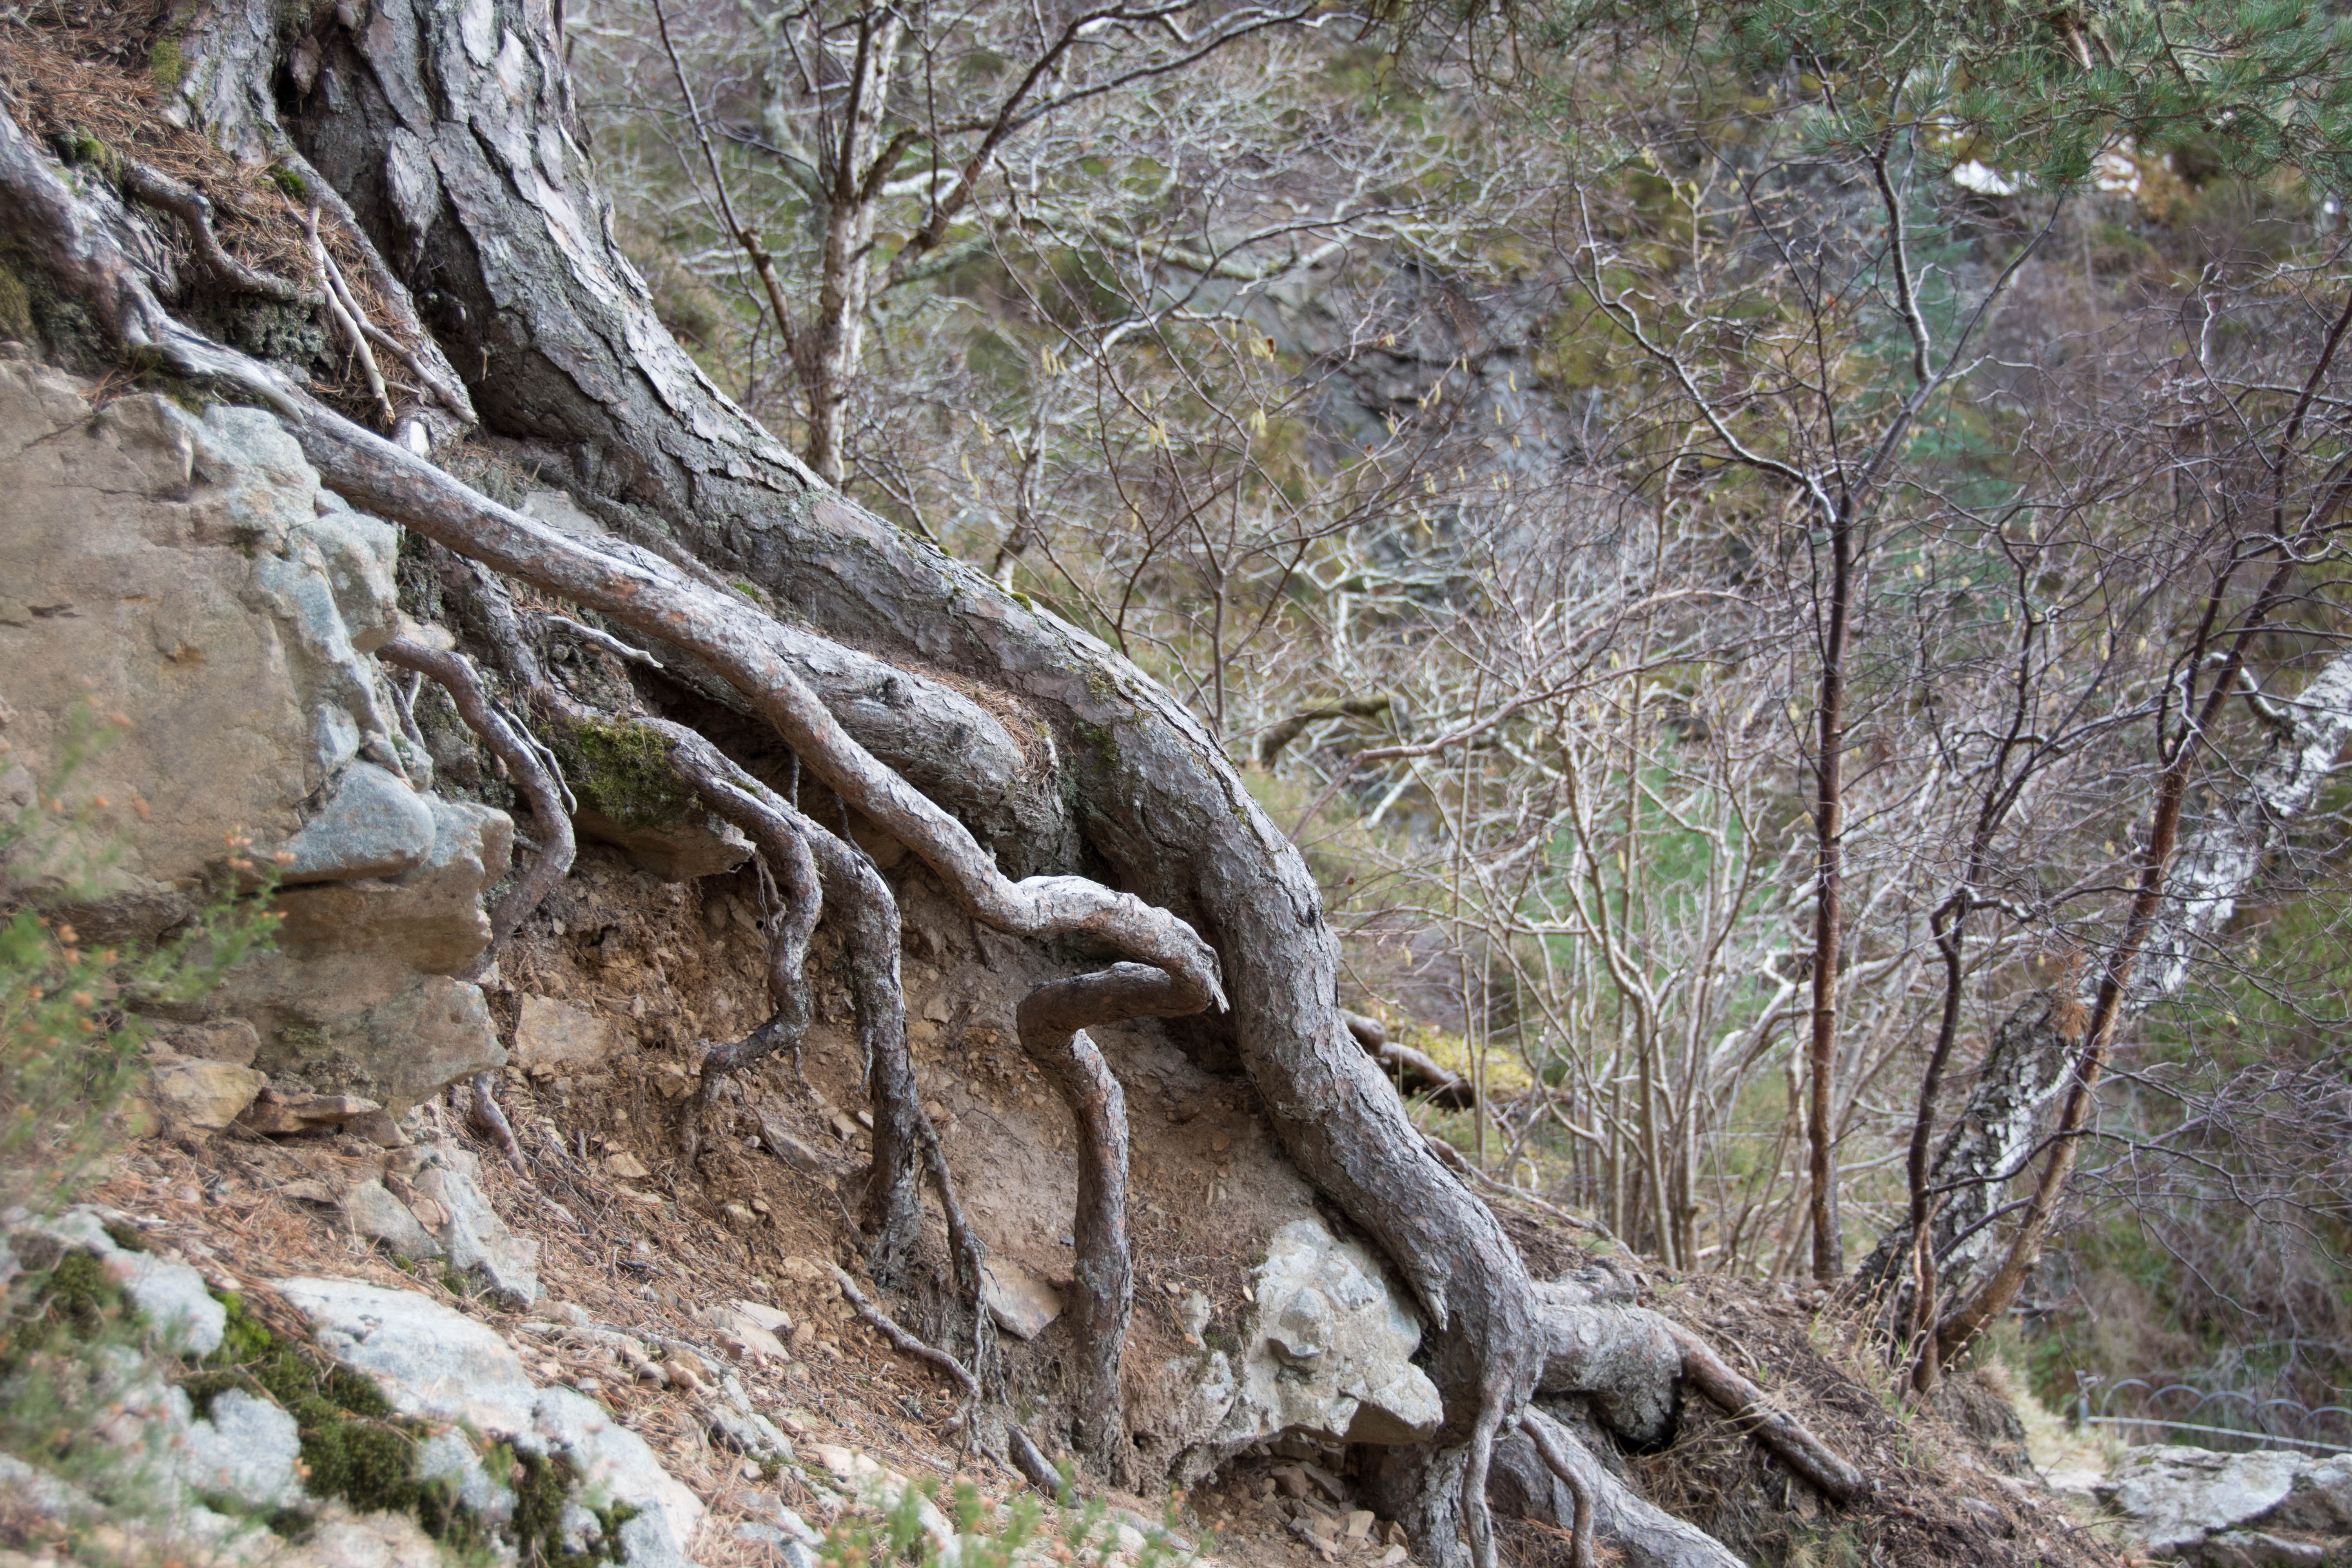 A landscape image of tree roots scrabbling into the dry earth of bank. The tree roots are covered in rough grey bark. The soil is a pale faun colour. There are winter trees in the background with the odd splash of green yellow lichen.